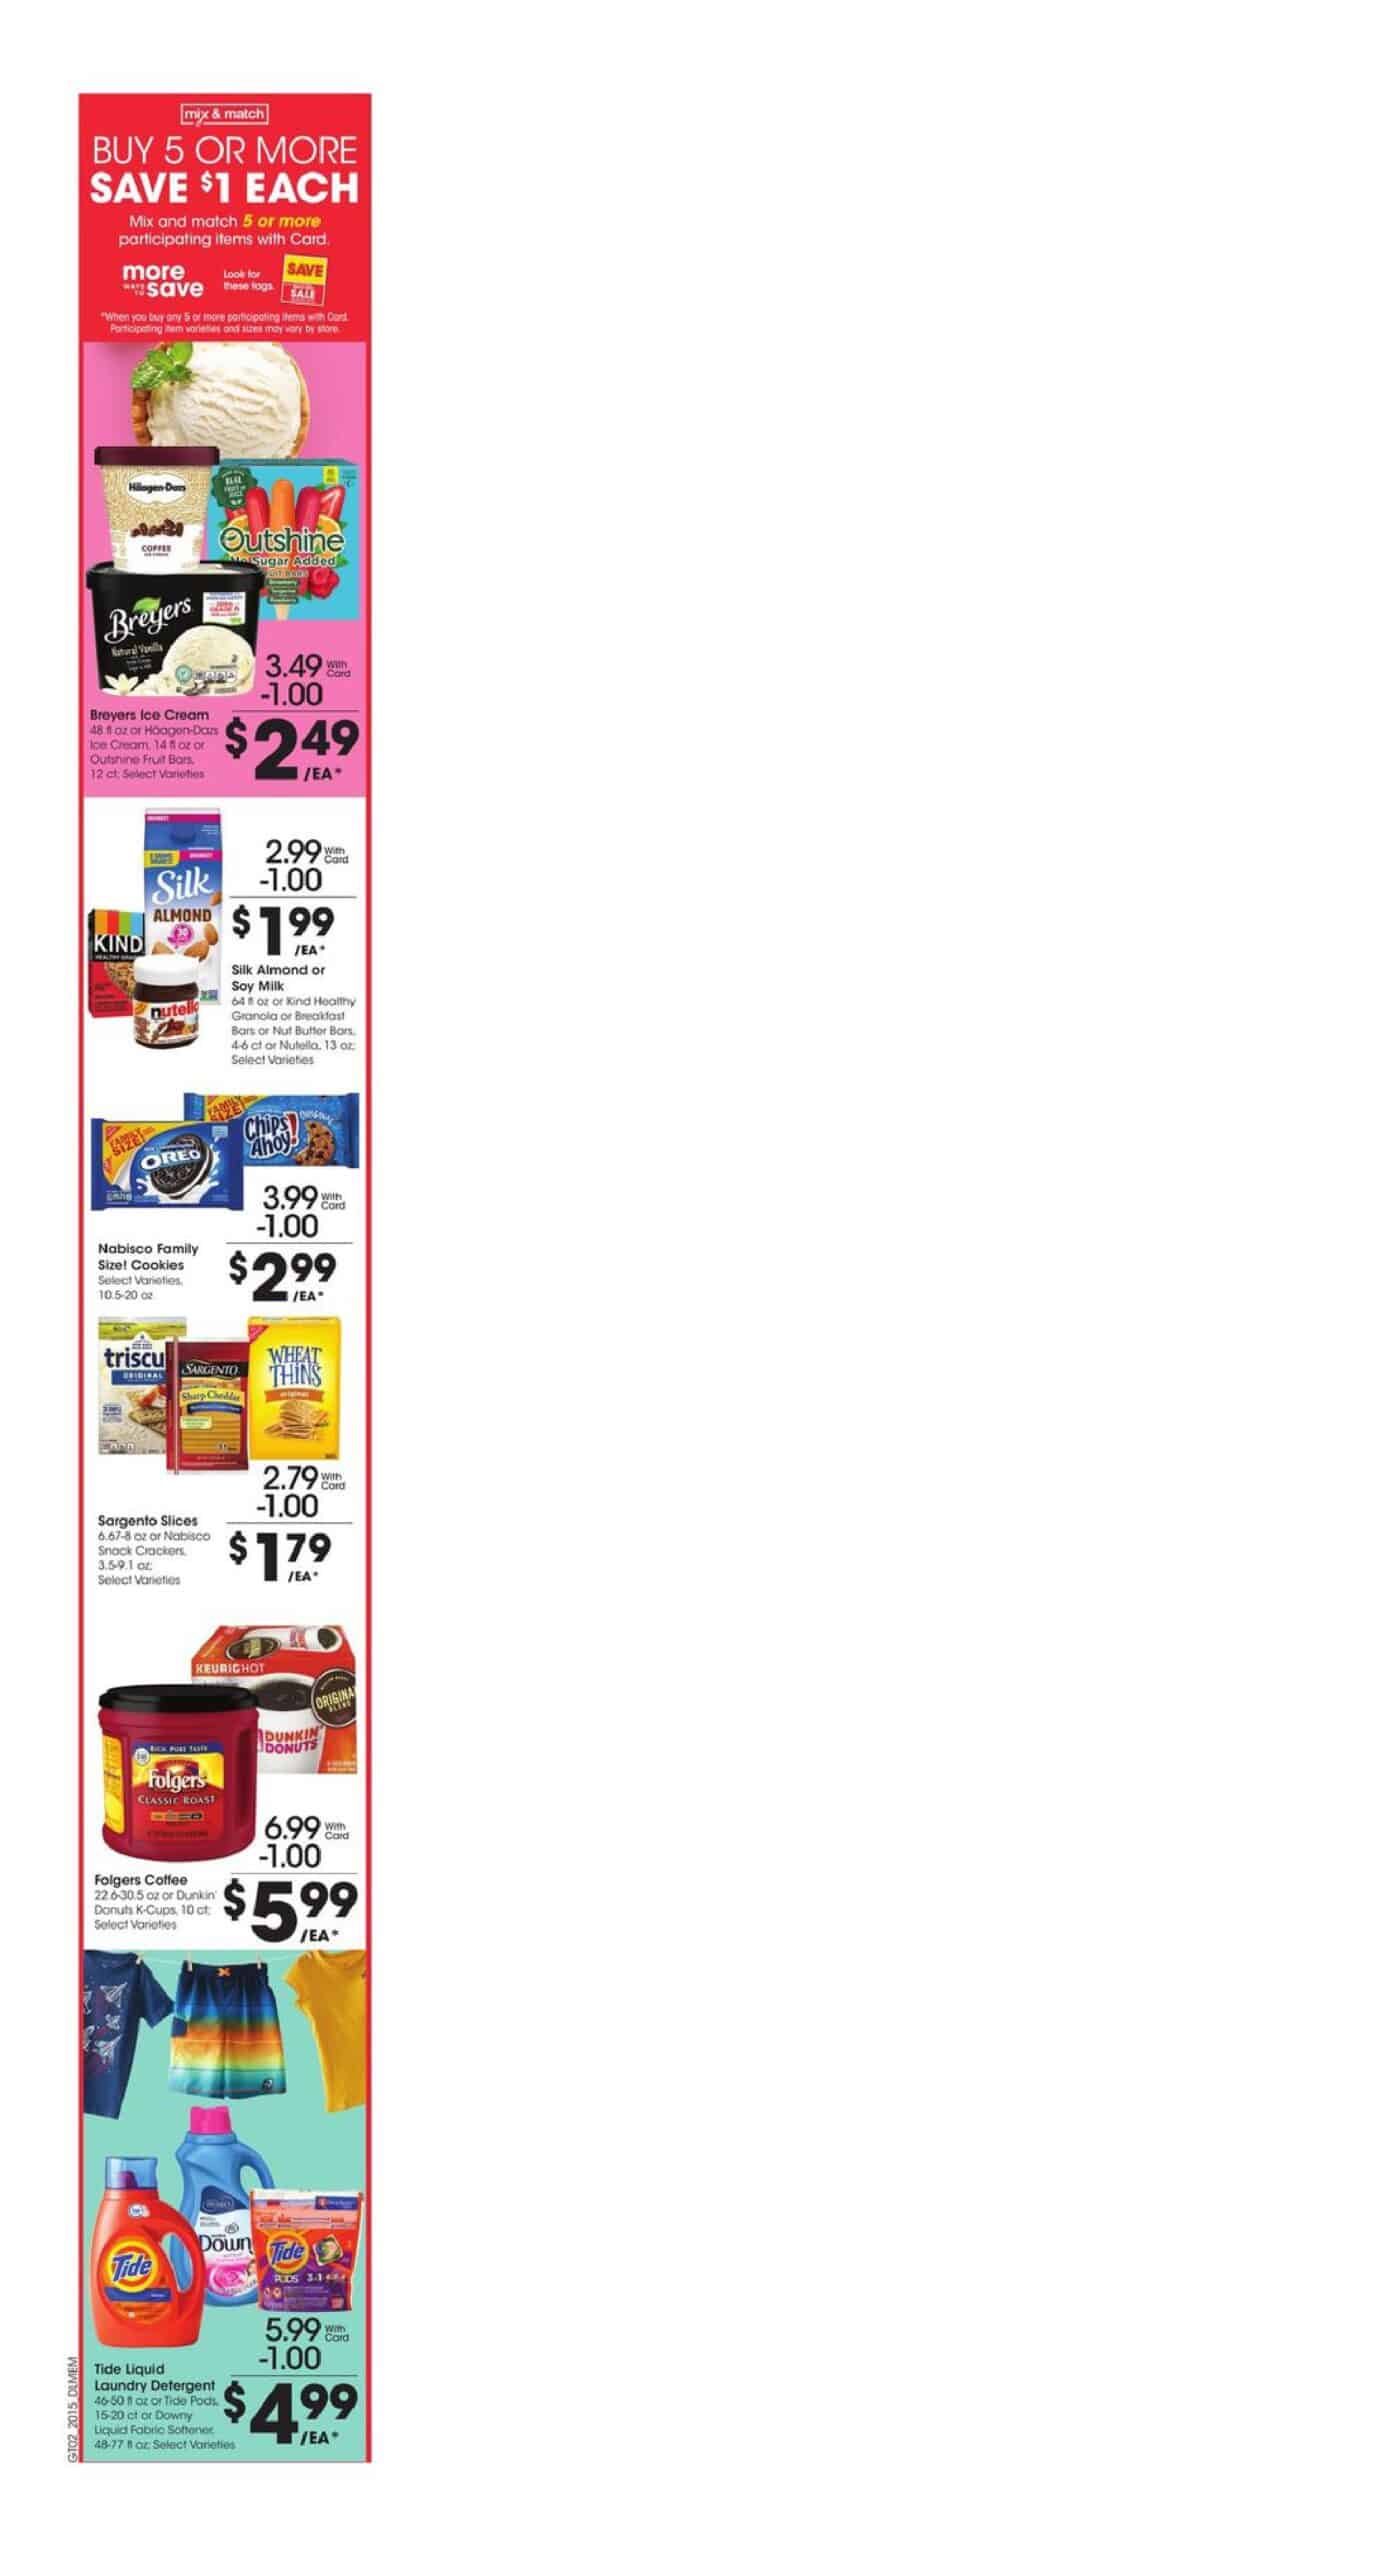 Kroger Weekly Ad Scan for 05/13/20 – 05/19/2020